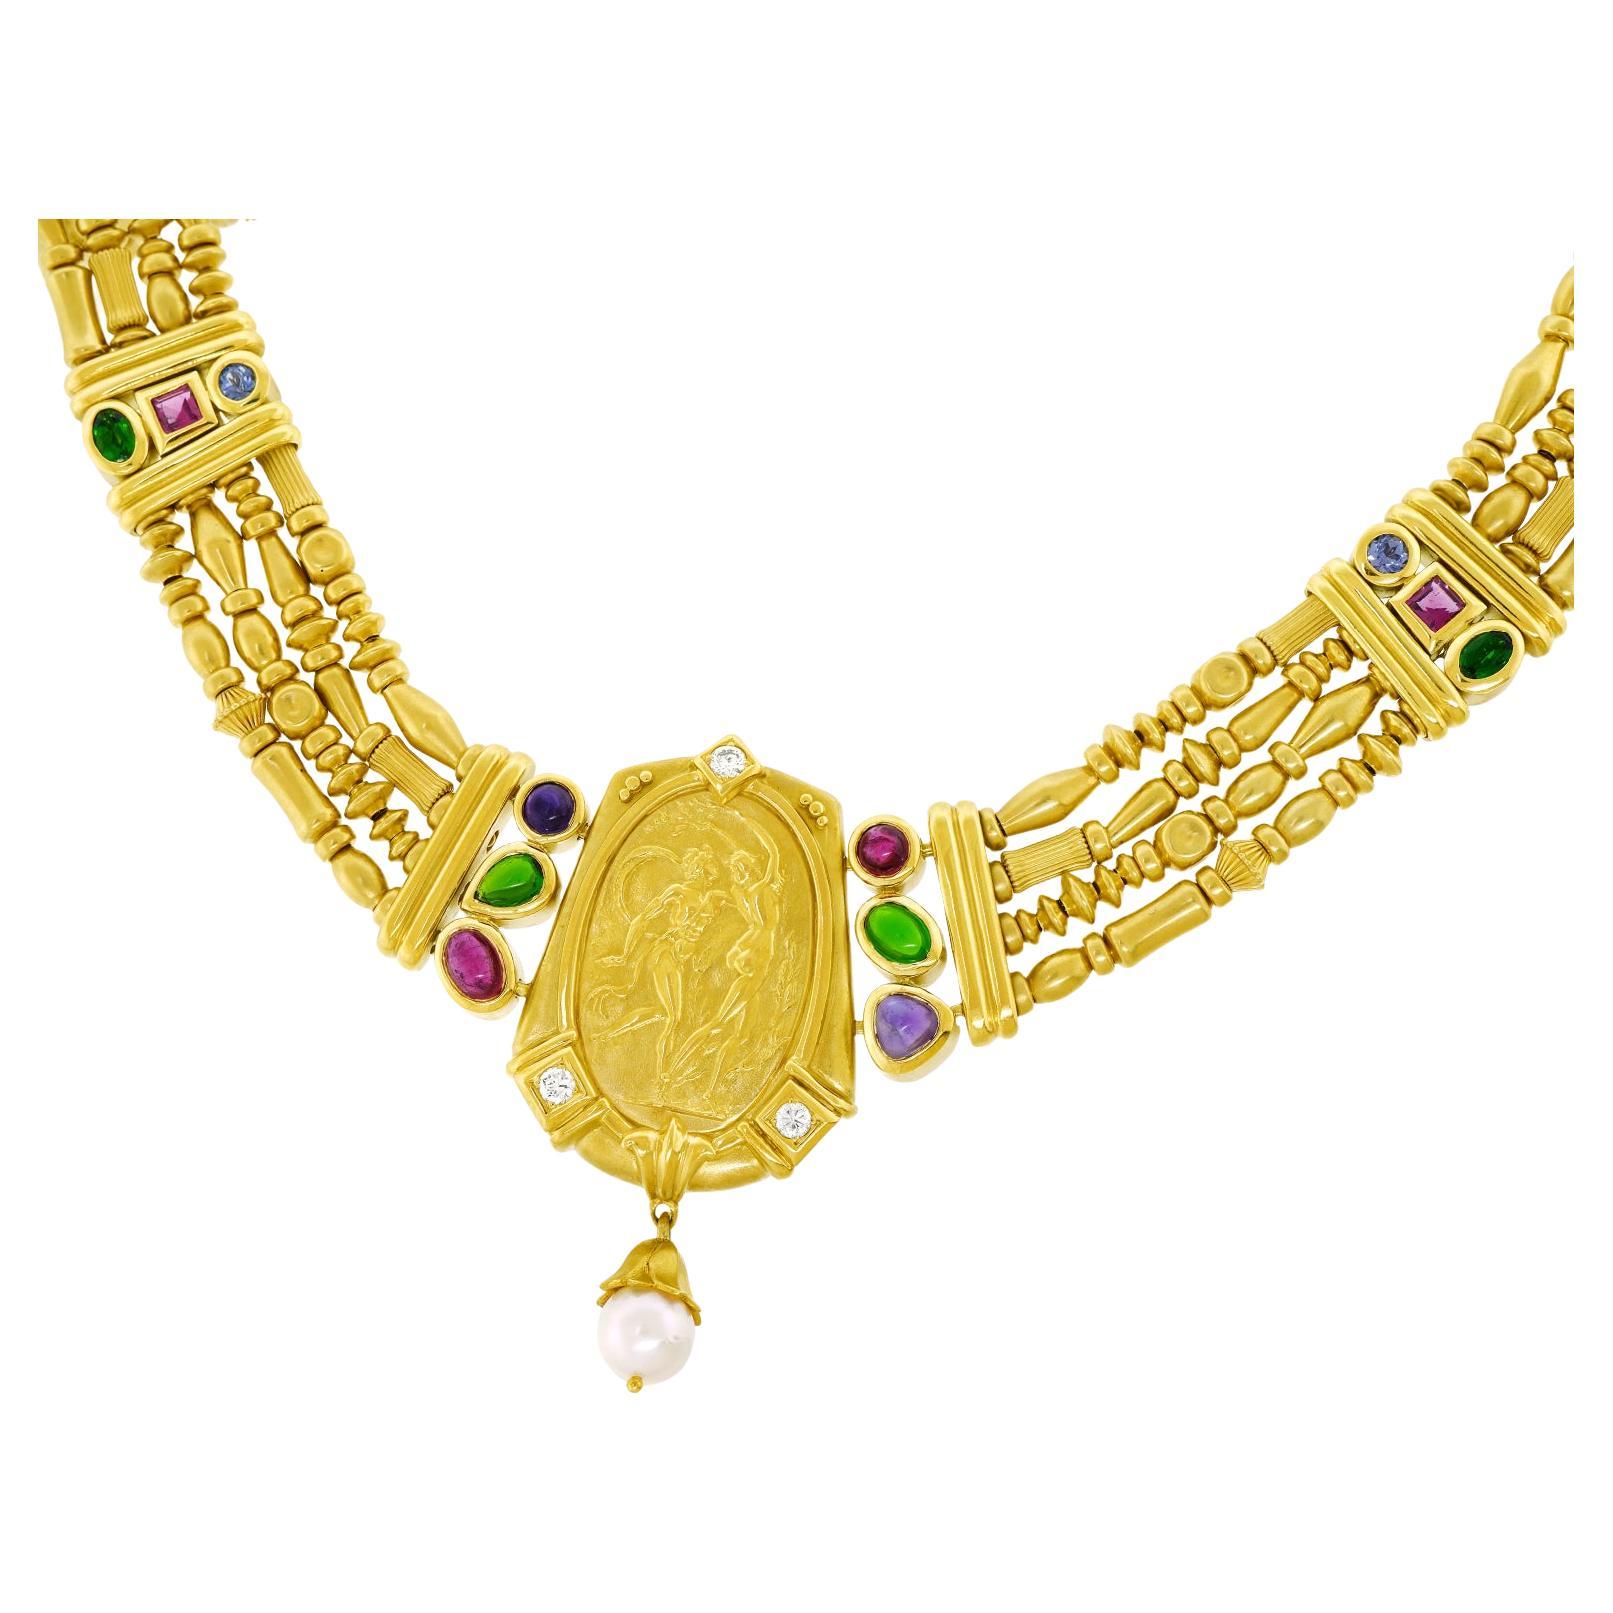 Spectacular Seidengang Necklace For Sale